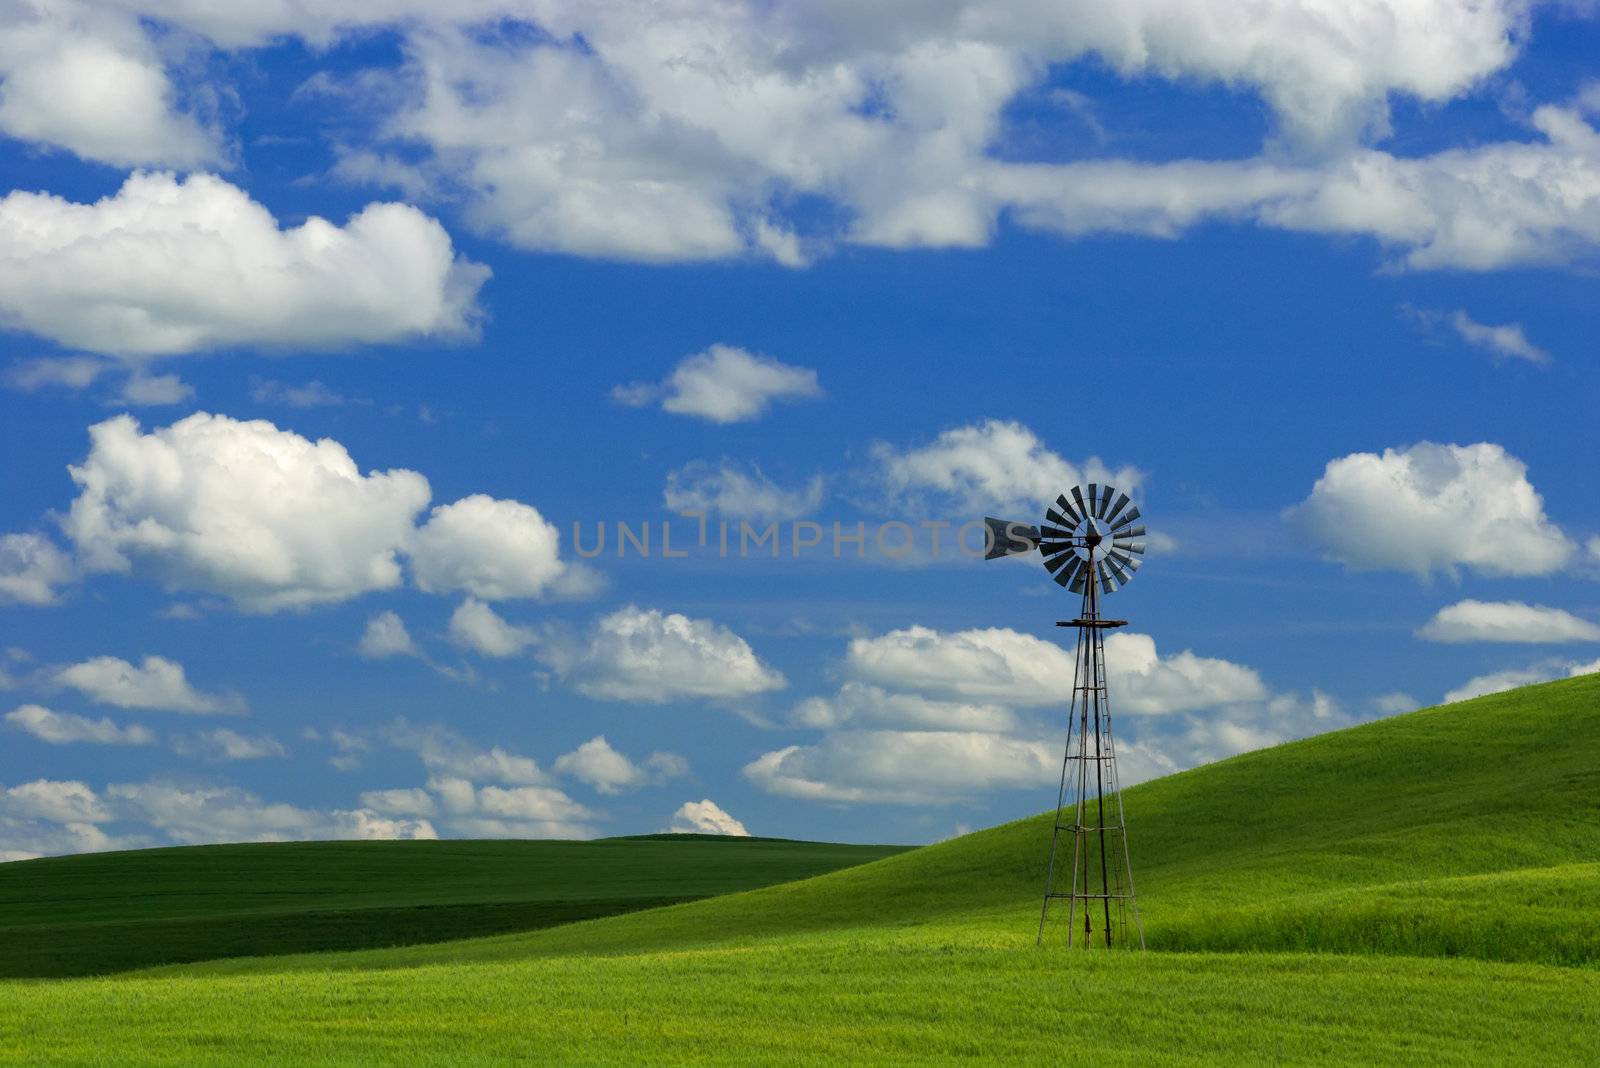 An old windmill, green wheat fields, cloud shadows and puffy clouds, Whitman County, Washington, USA by CharlesBolin